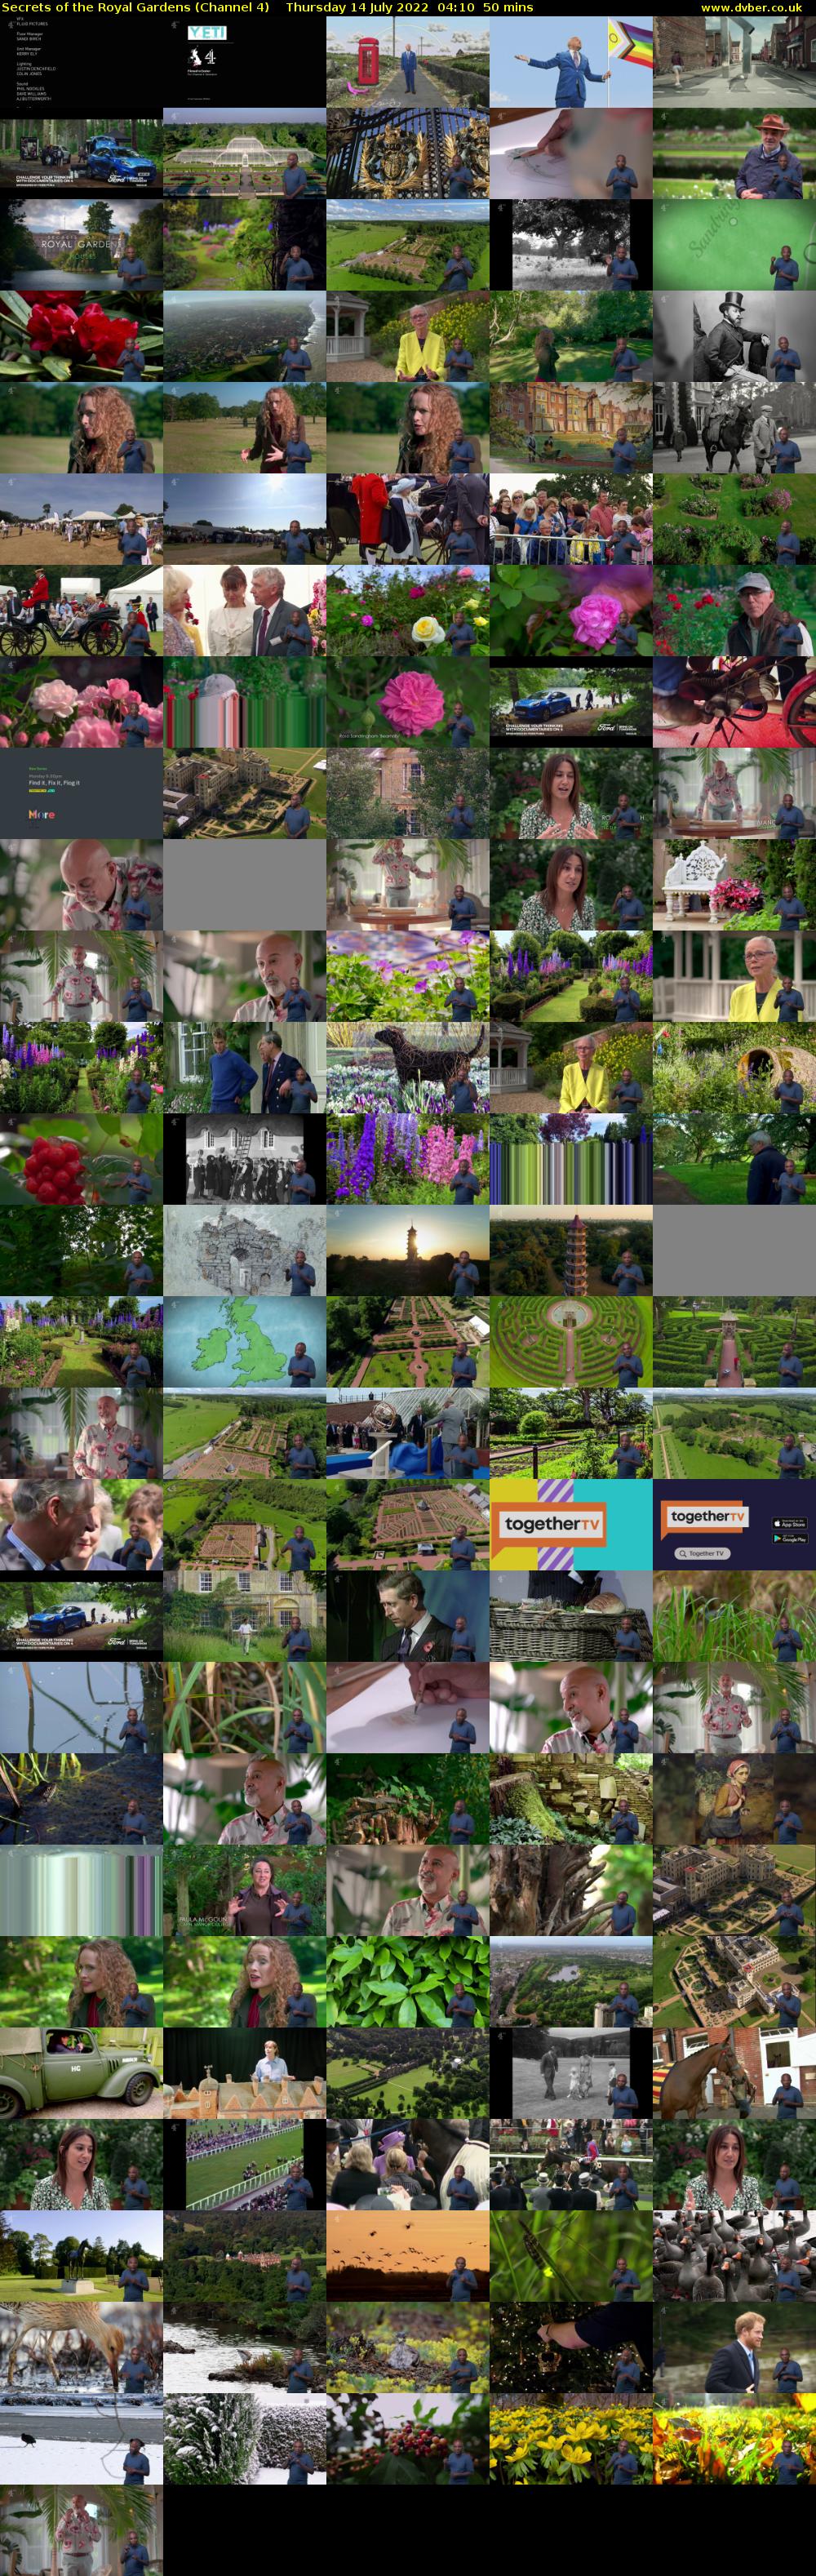 Secrets of the Royal Gardens (Channel 4) Thursday 14 July 2022 04:10 - 05:00